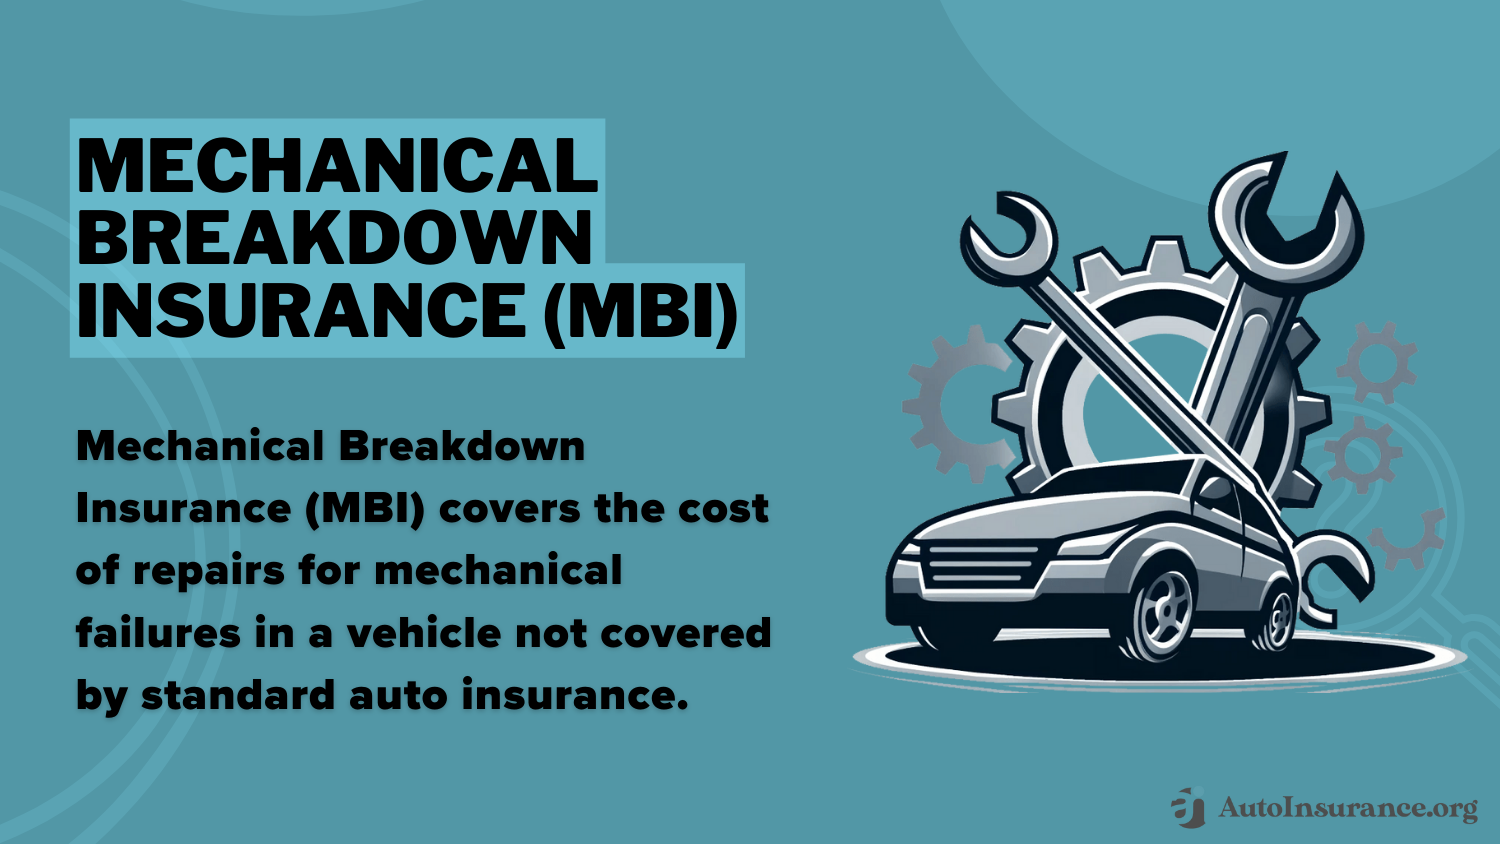 Does auto insurance cover engine failure?: Mechanical Breakdown Insurance (MBI) Definition Card